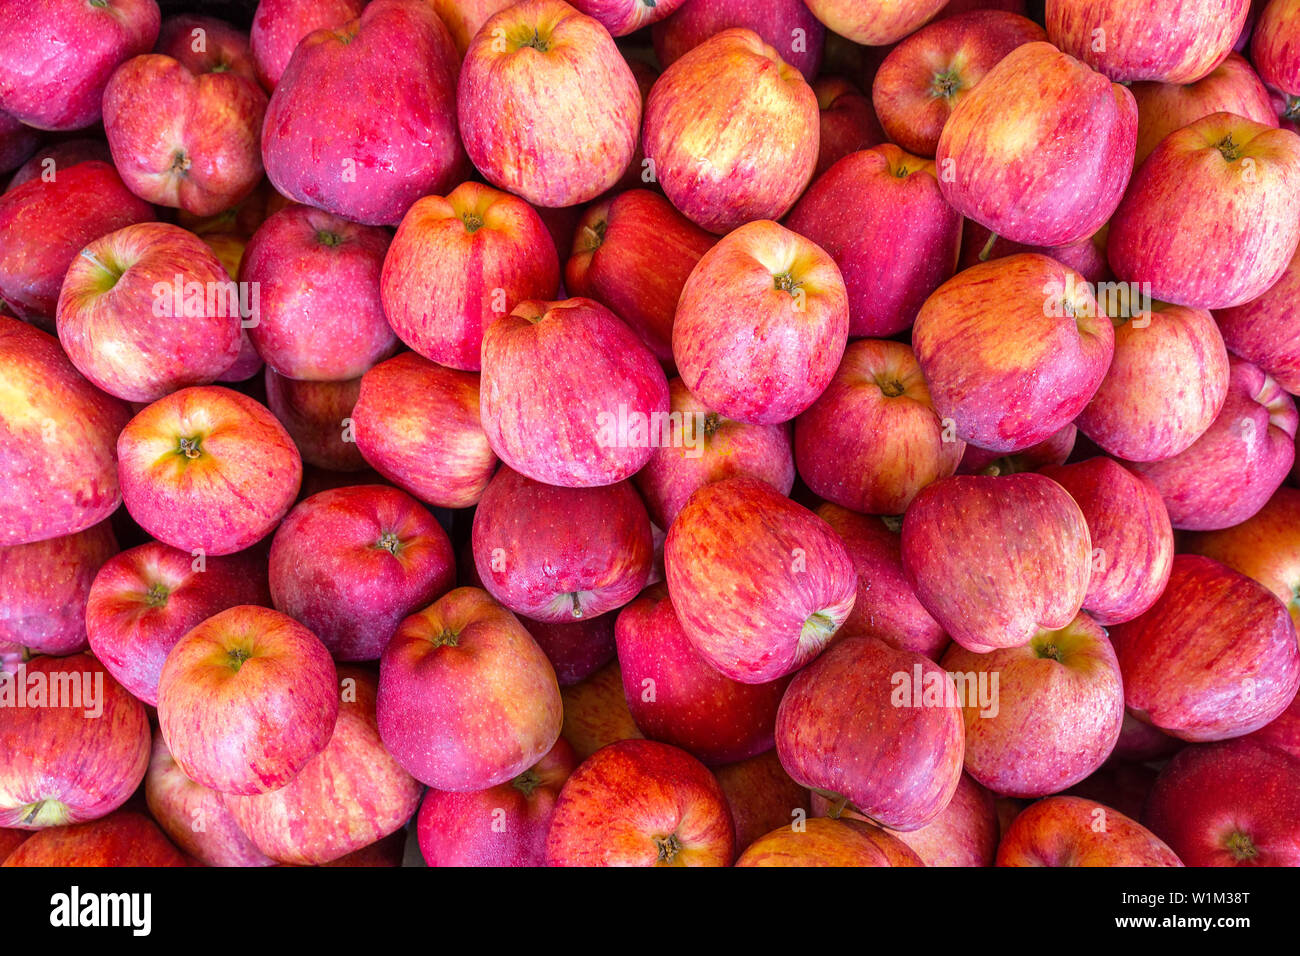 Crop of many fresh red yellow apples on market Stock Photo